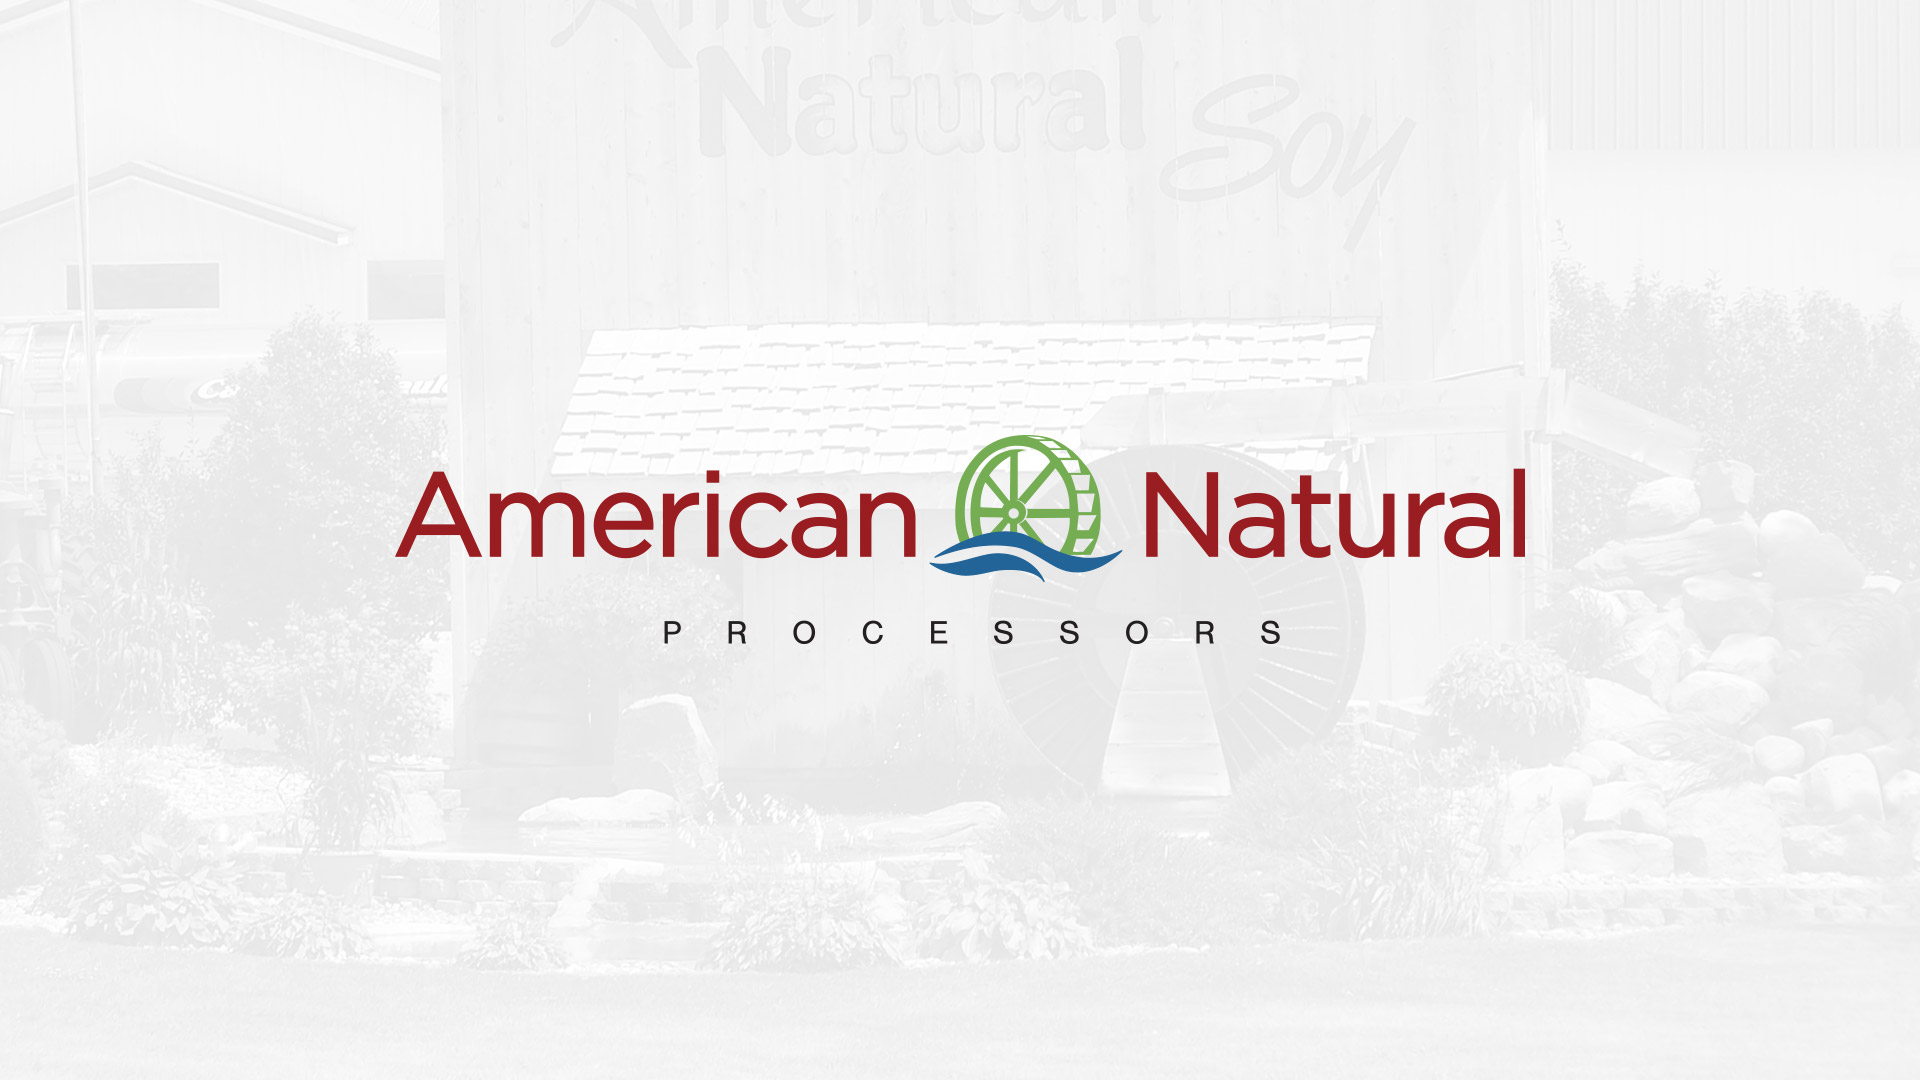 American Natural Soy